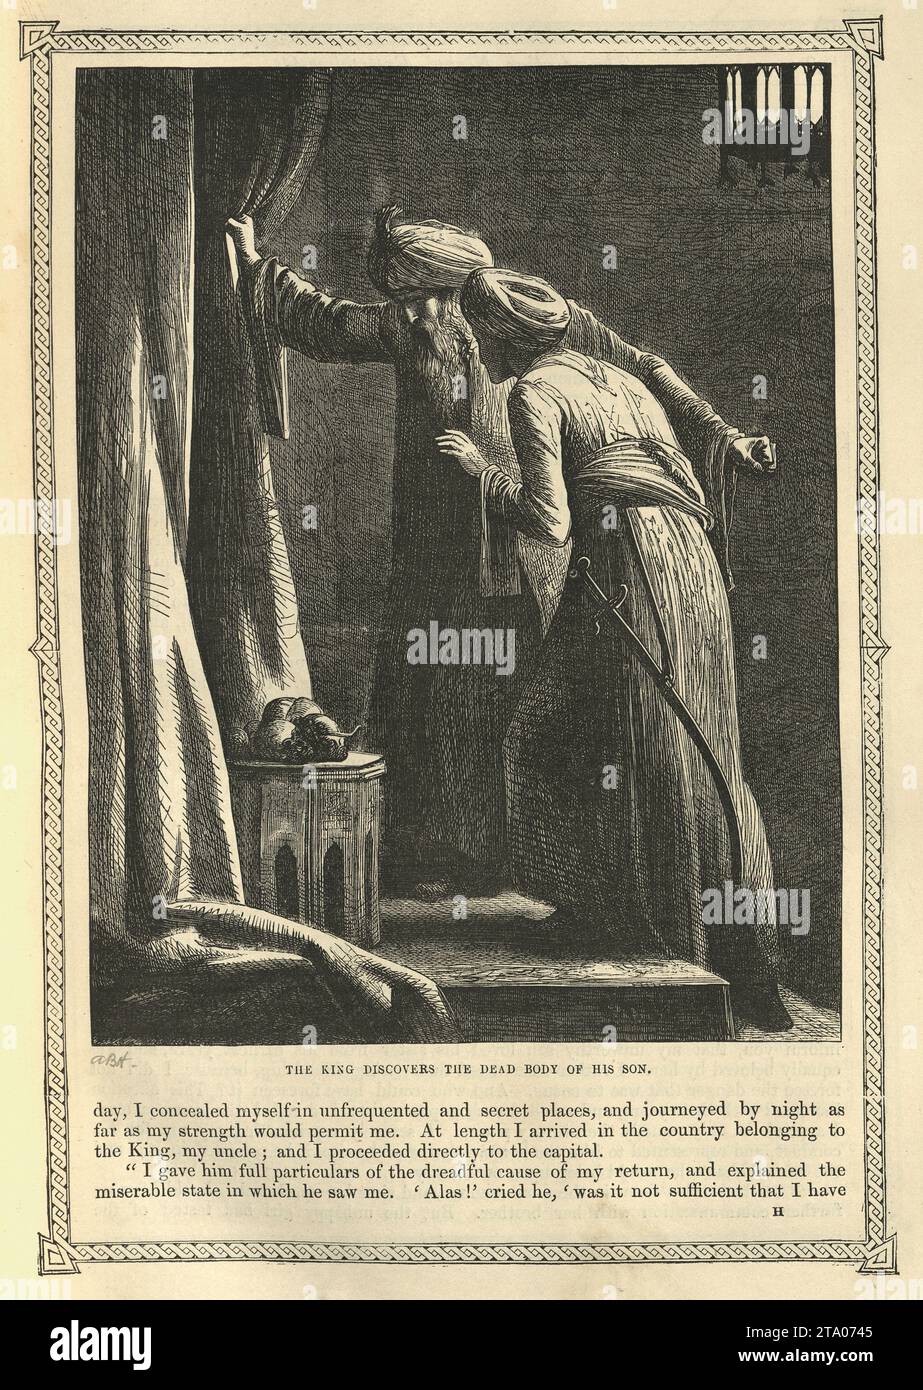 Vintage illustration One Thousand and One Nights, The King discovers the dead body of his son, Arabian, Middle Eastern folktales, by The Brothers Dalziel. The Story of the First Calender, Son of a King Stock Photo